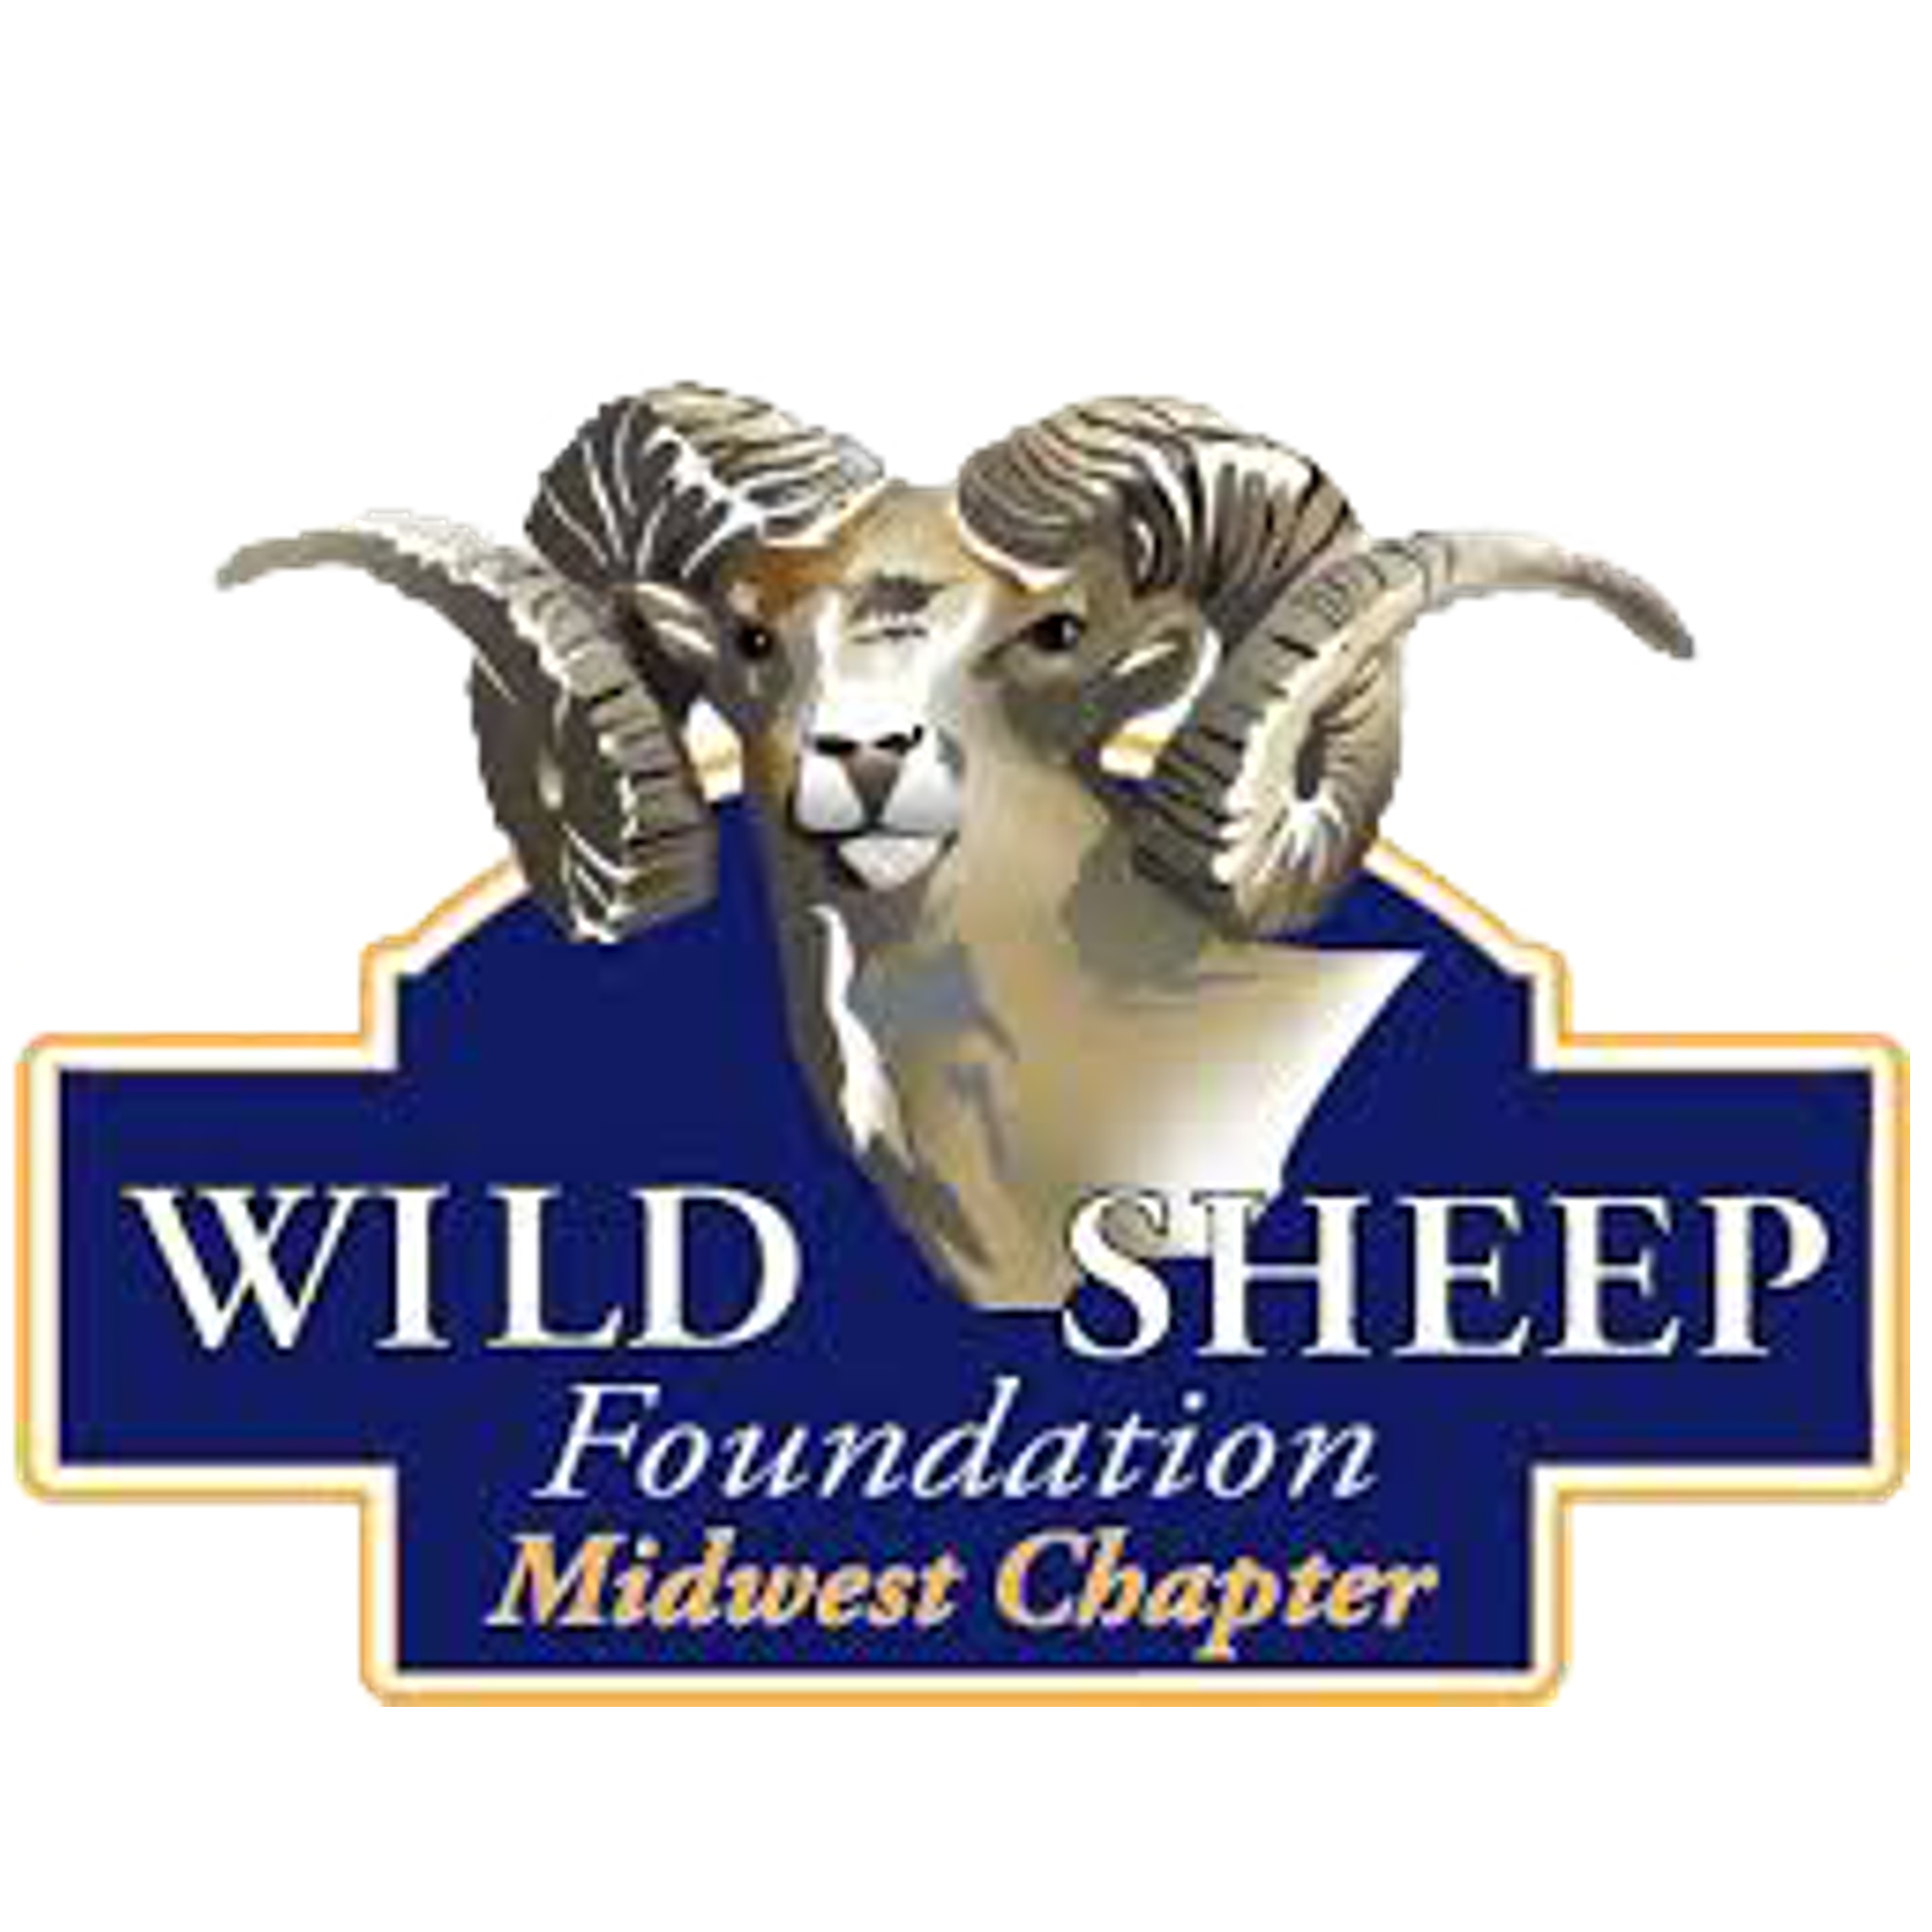 Wild Sheep Foundation Midwest Chapter